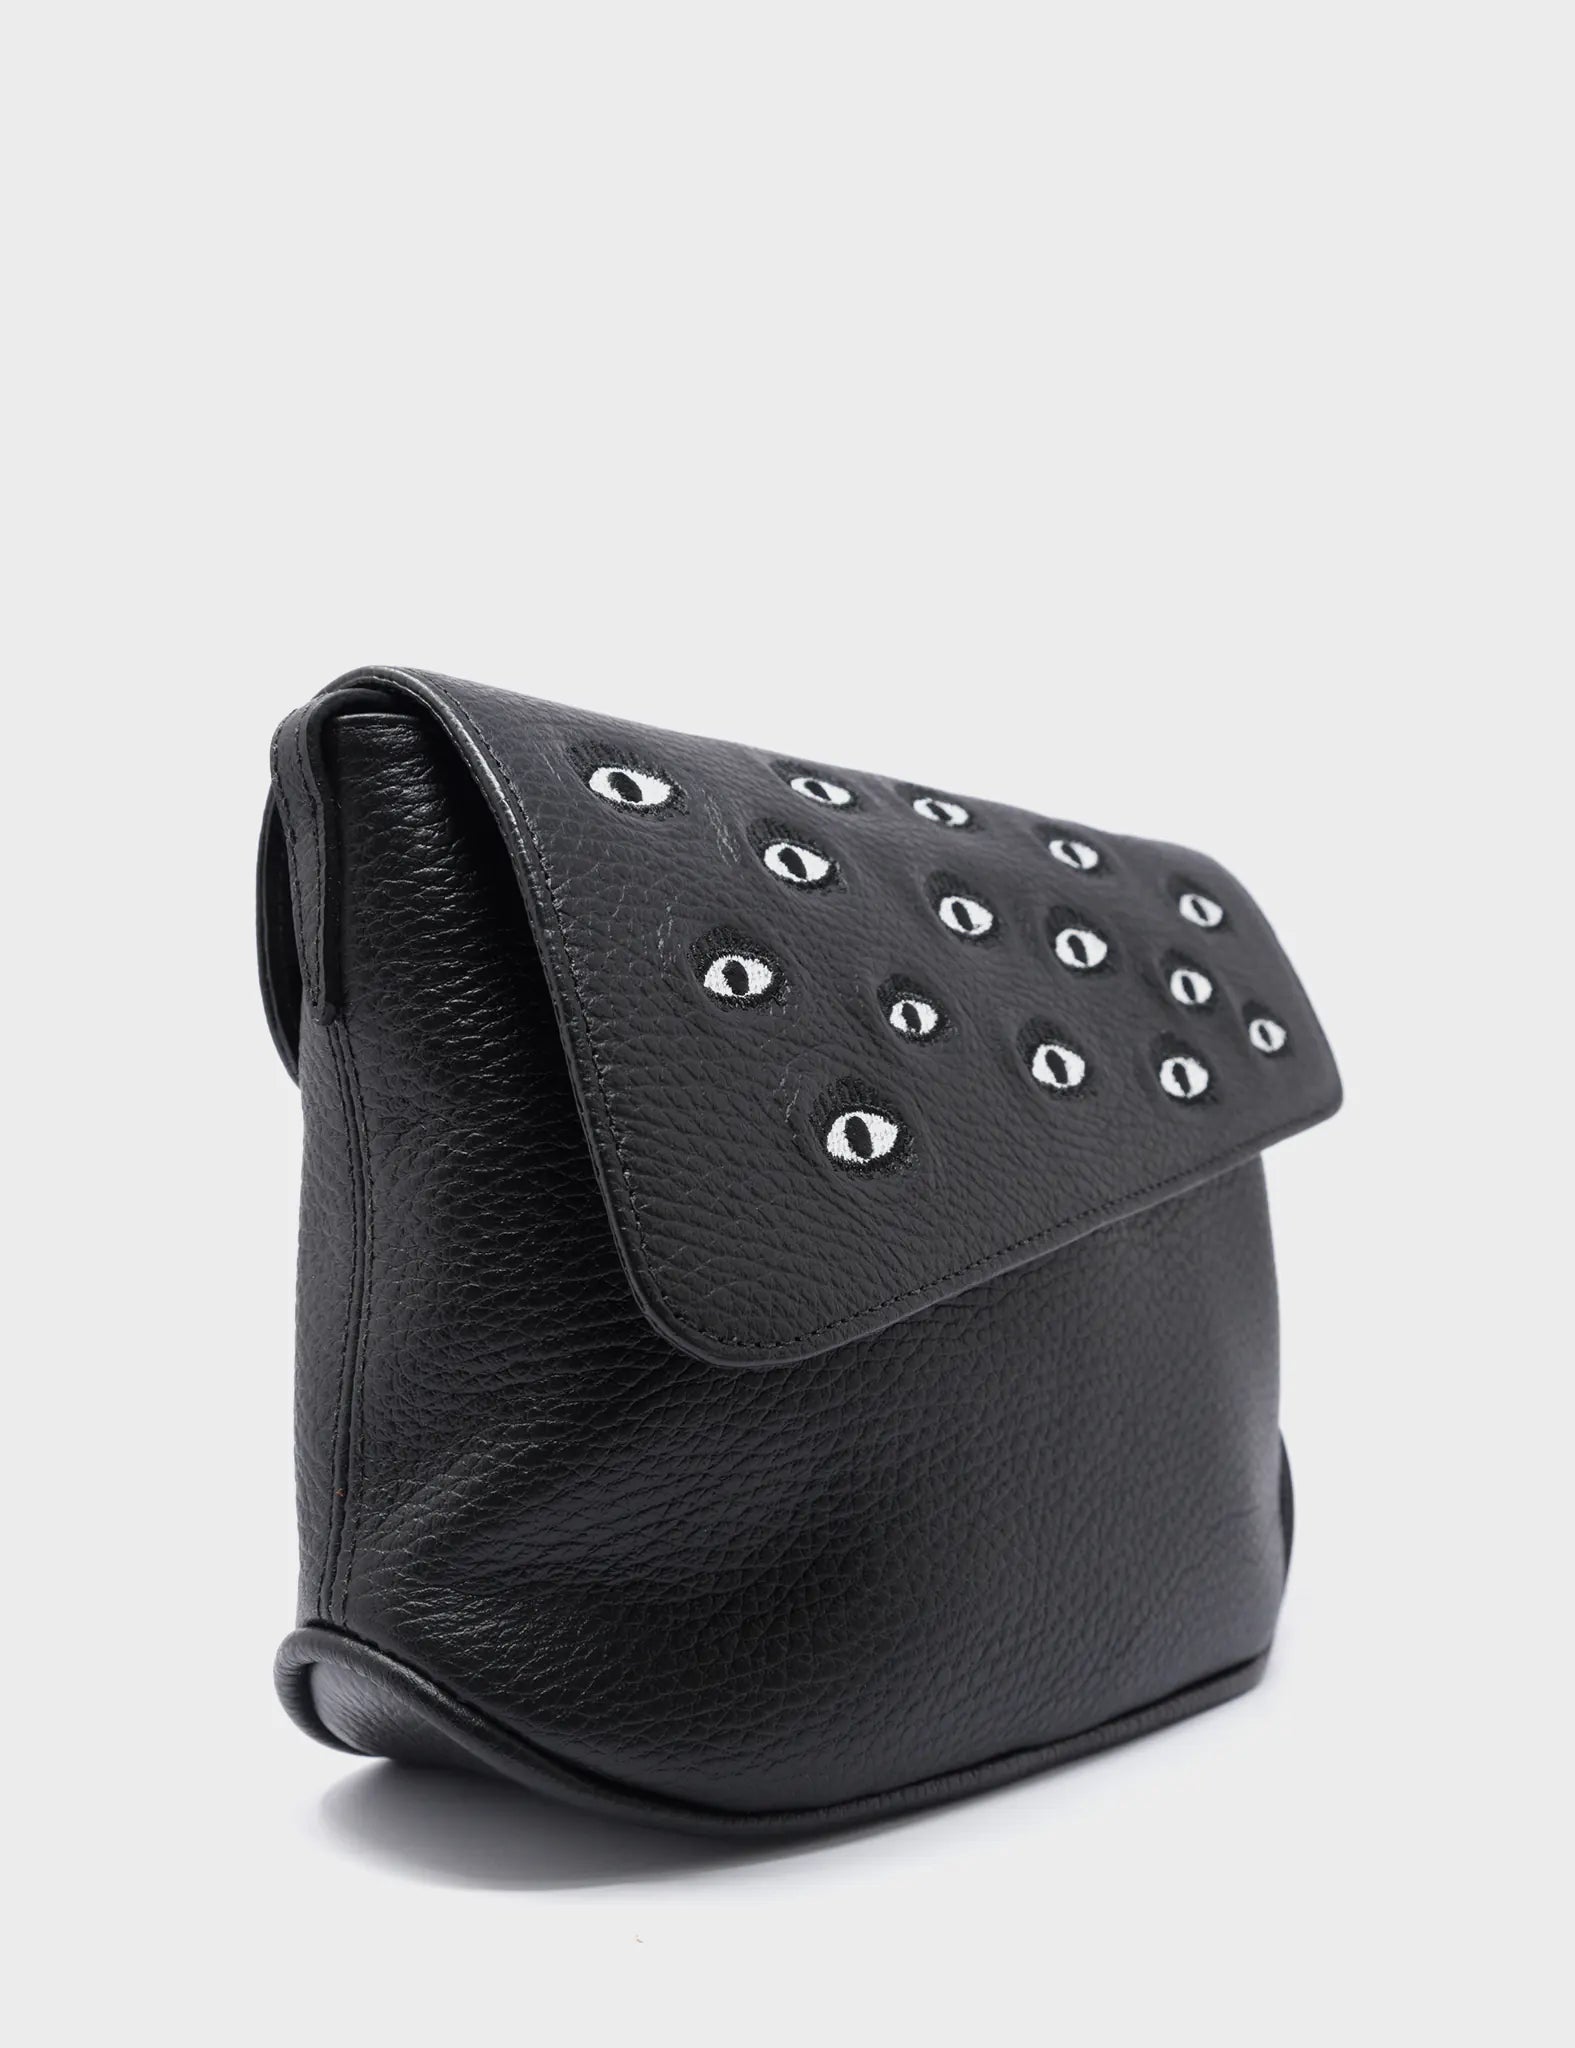 Bruno Mini Crossbody Black Leather Bag - All Over Eyes Embroidery - Side View